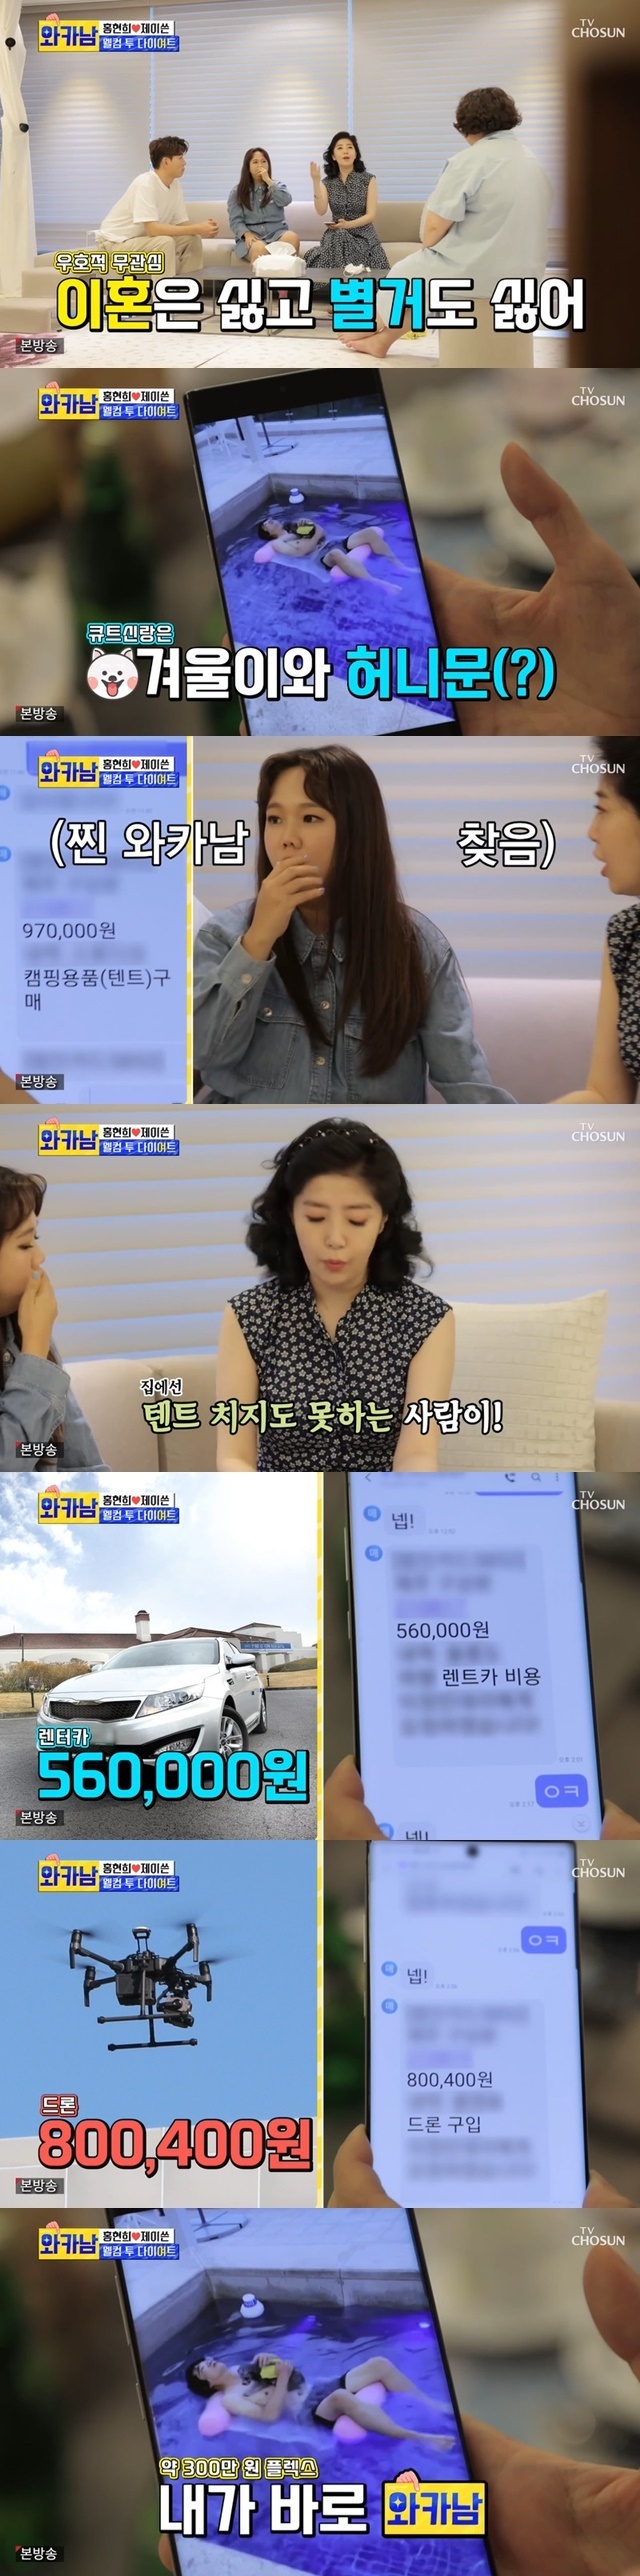 Yeo Esther revealed the use of Card, saying that it is friendly and different from Husband Hong Hye-geol and Divorce.On the TV Chosun Wyfe Card Written Man (Wakanam), which was broadcast on August 24, Yeo Esther said that Husband Hong Hye-geol and friendly Indifferent state are.On this day, Hong Hyun-hee Jay-Won couple and Mirage visited Yeo Esther and received Mirages diet consultation.Hong Hyun-hee and Jay-Won said that they also asked for the greetings of Yeo Esther Husband Hong Hye-geol, and Yeo Esther said that she did not like divorce and did not like separation.When Yeo Esther released the text message, Hong Hyun-hee said, But the name is Cute groom. Yeo Esther was embarrassed and released the credit card details and photos used by Husband Hong Hye-geol.Ive been living like this, said Yeo Esther. I bought kayaks. Why am I angry? From Tuesday, 970,000 won.550,000 won for tent equipment, 560,000 won for rental car, and 800,000 won for drones. 